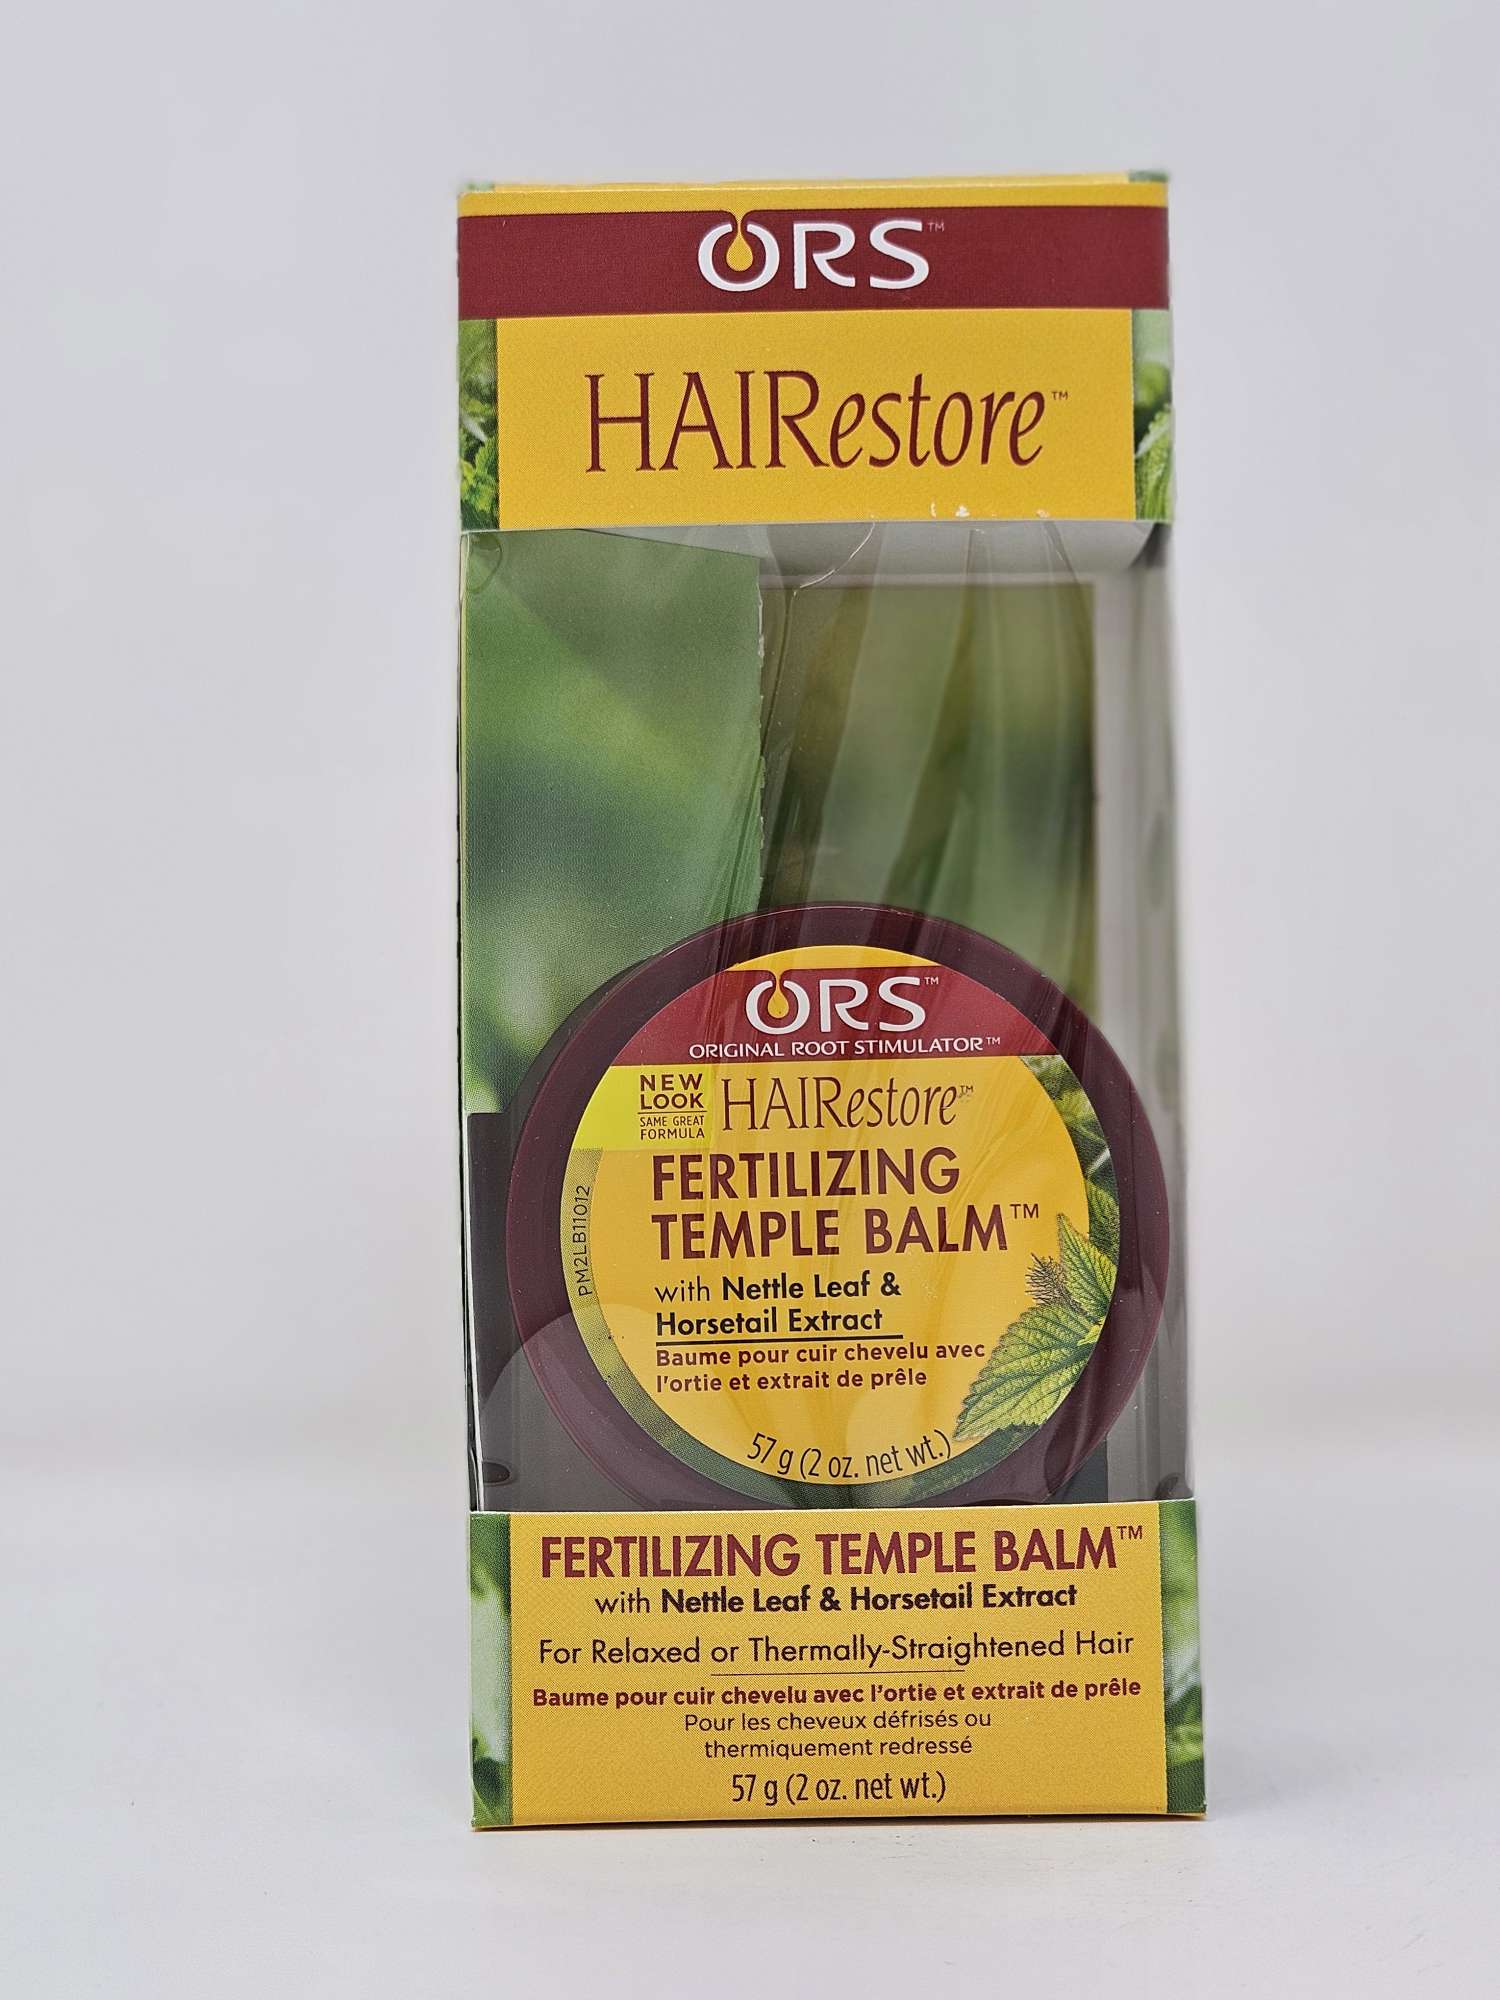 ORS HAIRestore Fertilizing Temple Balm with Nettle Leaf & Horsetail Extract - 2oz